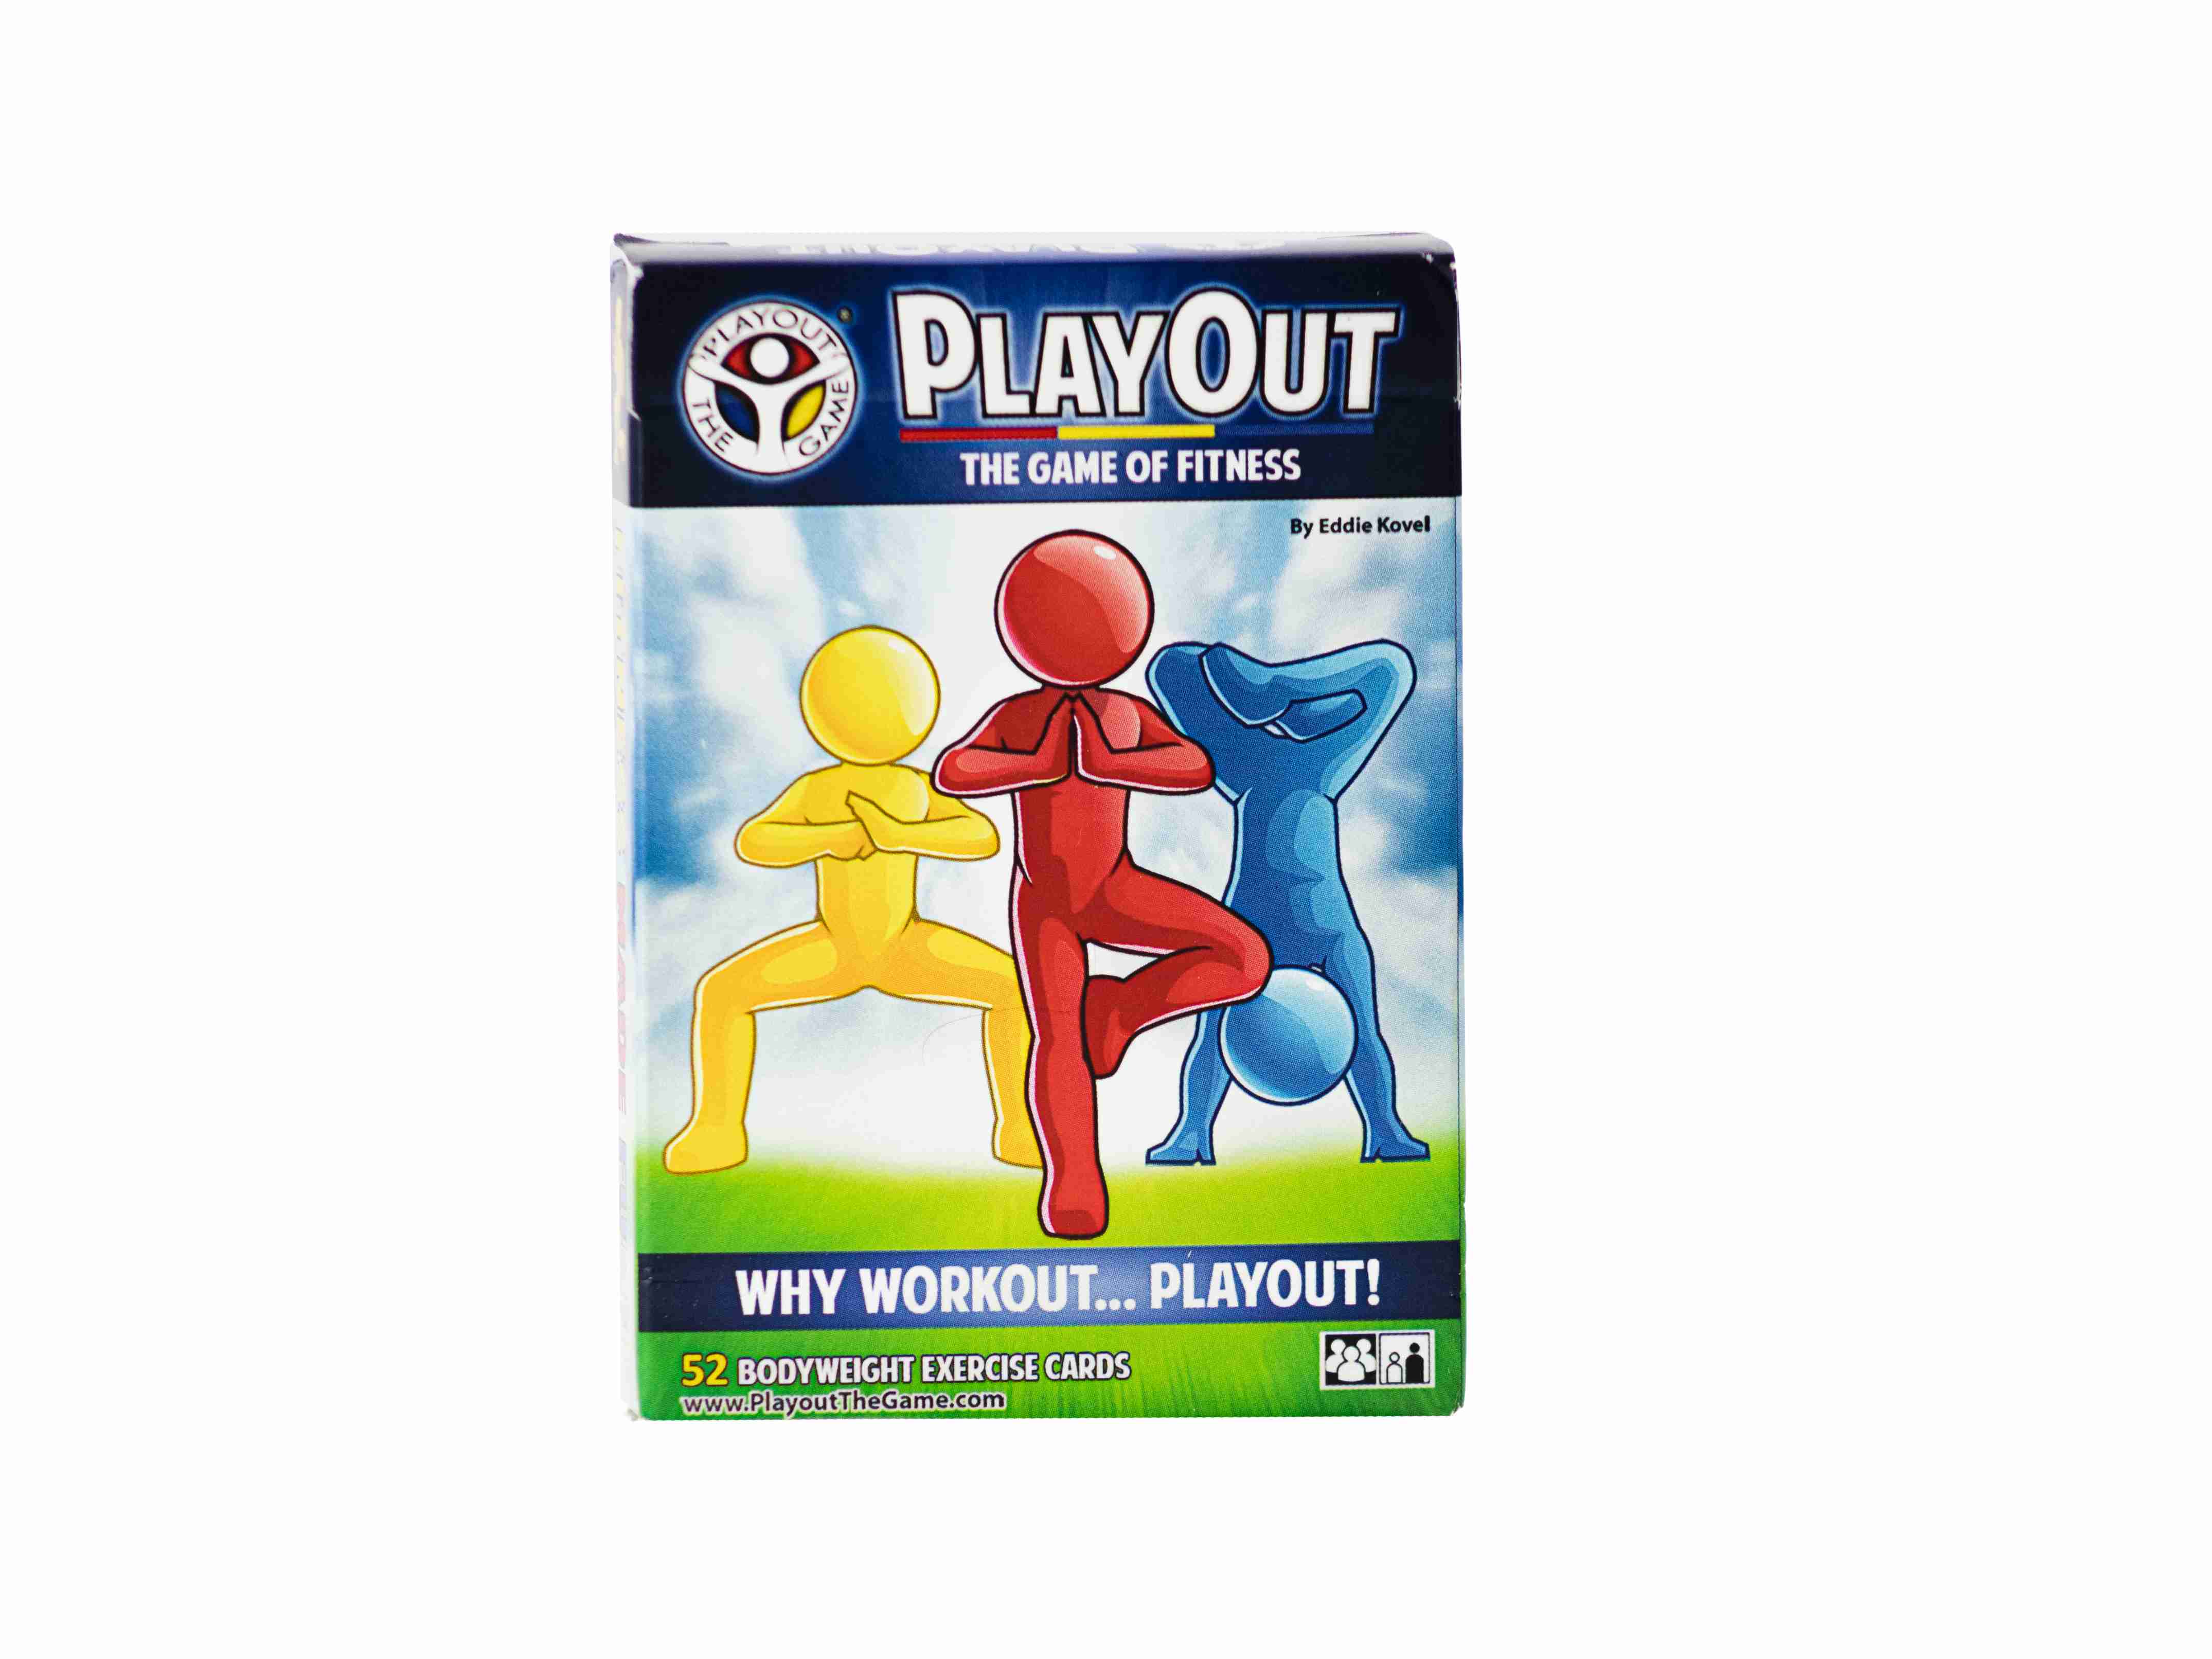 Playout: The Game of Fitness